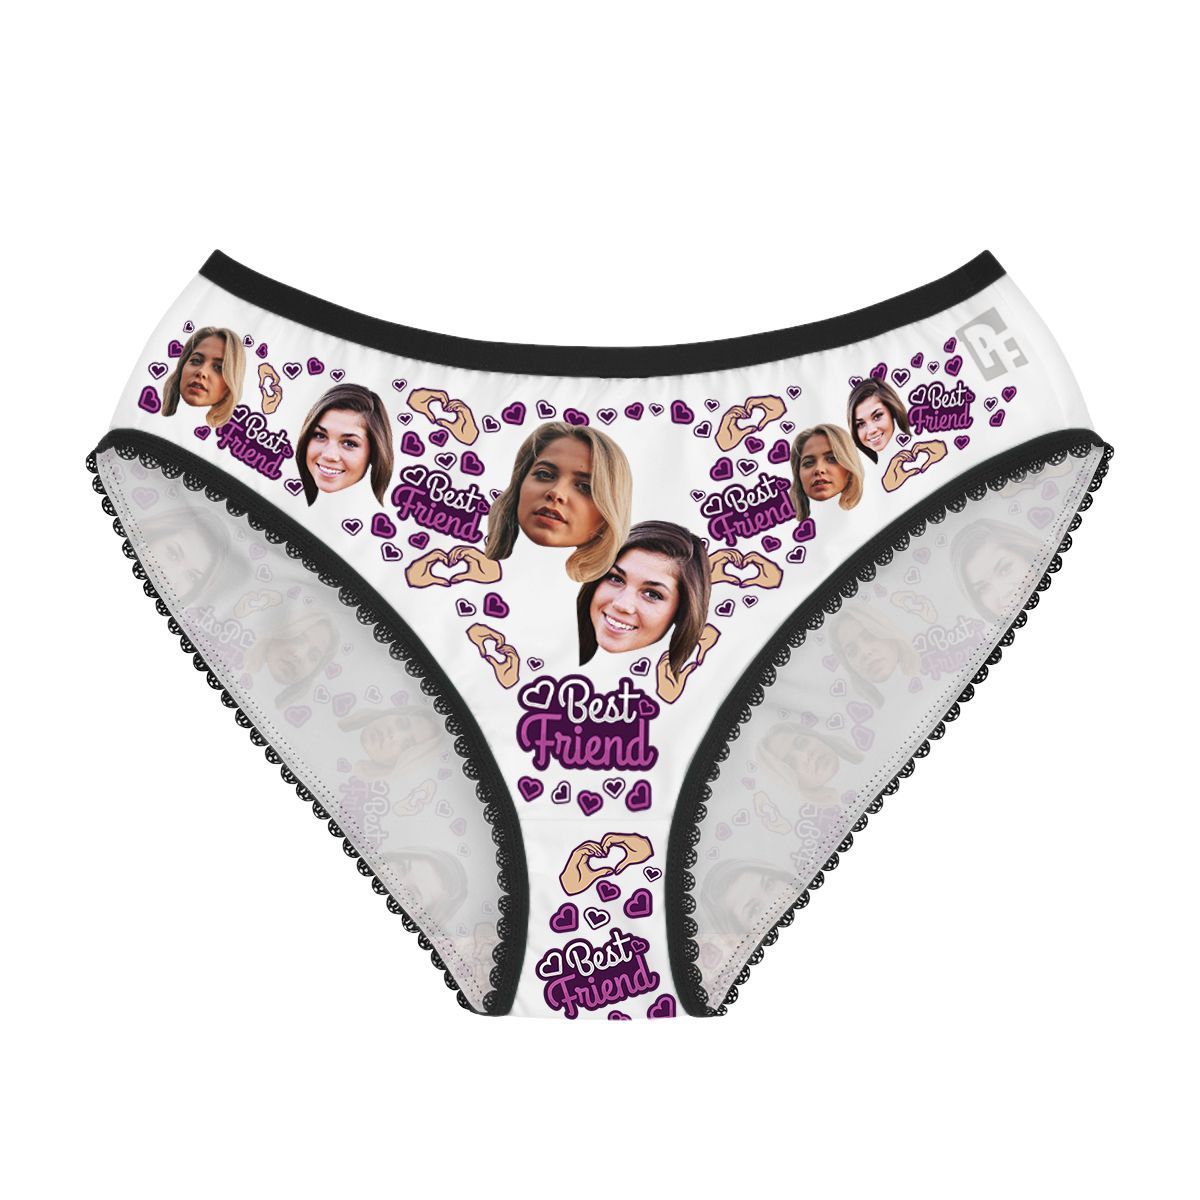 White BFF for her women's underwear briefs personalized with photo printed on them